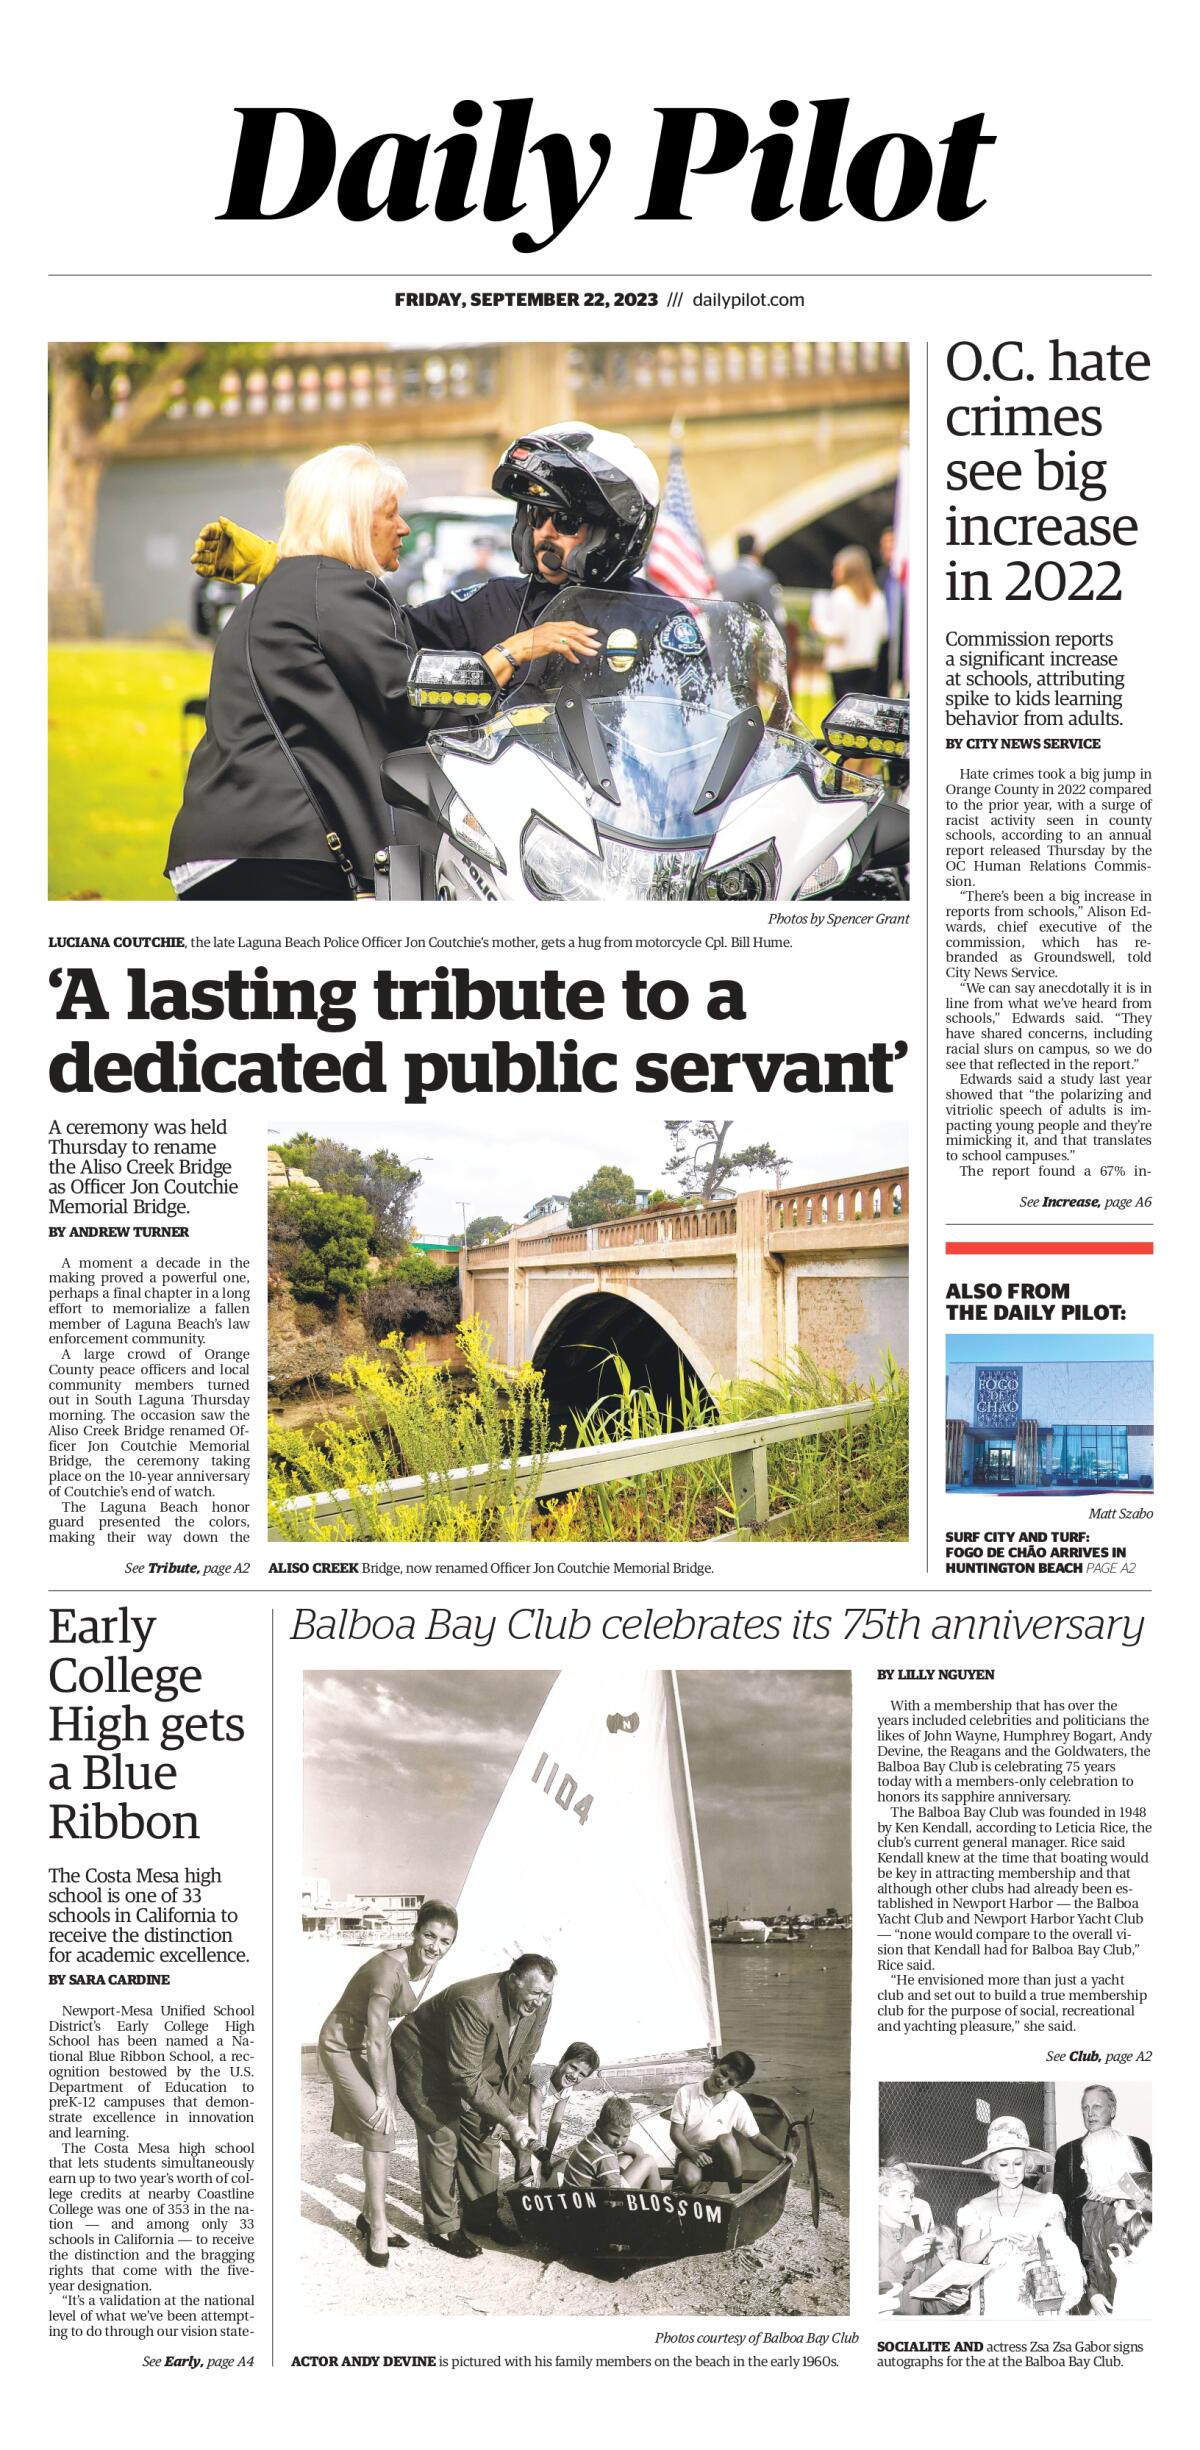 Front page of the Daily Pilot e-newspaper for Friday, Sept. 22, 2023.